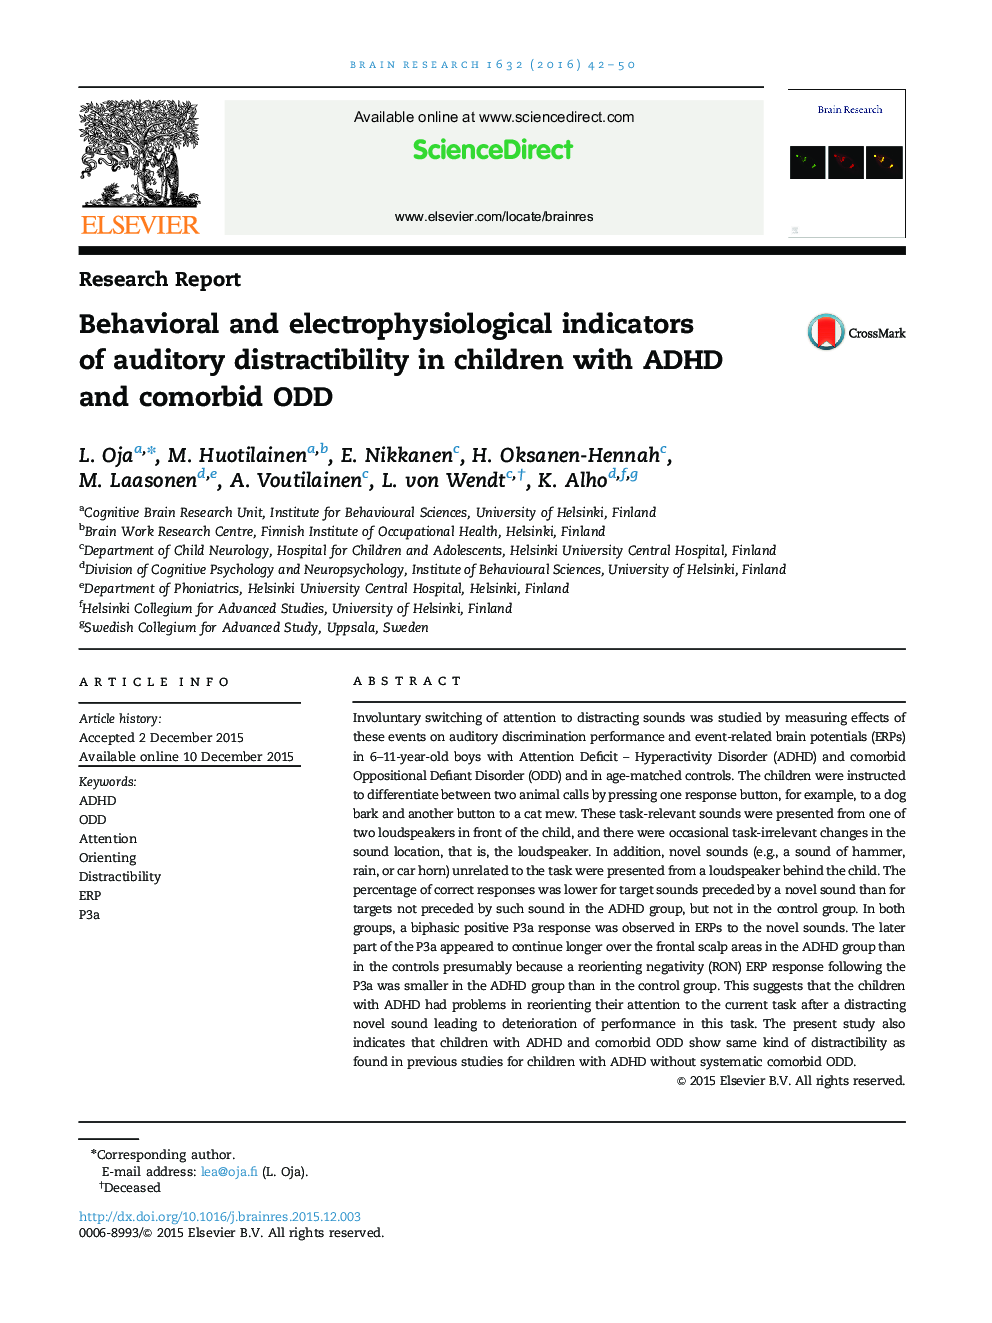 Behavioral and electrophysiological indicators of auditory distractibility in children with ADHD and comorbid ODD